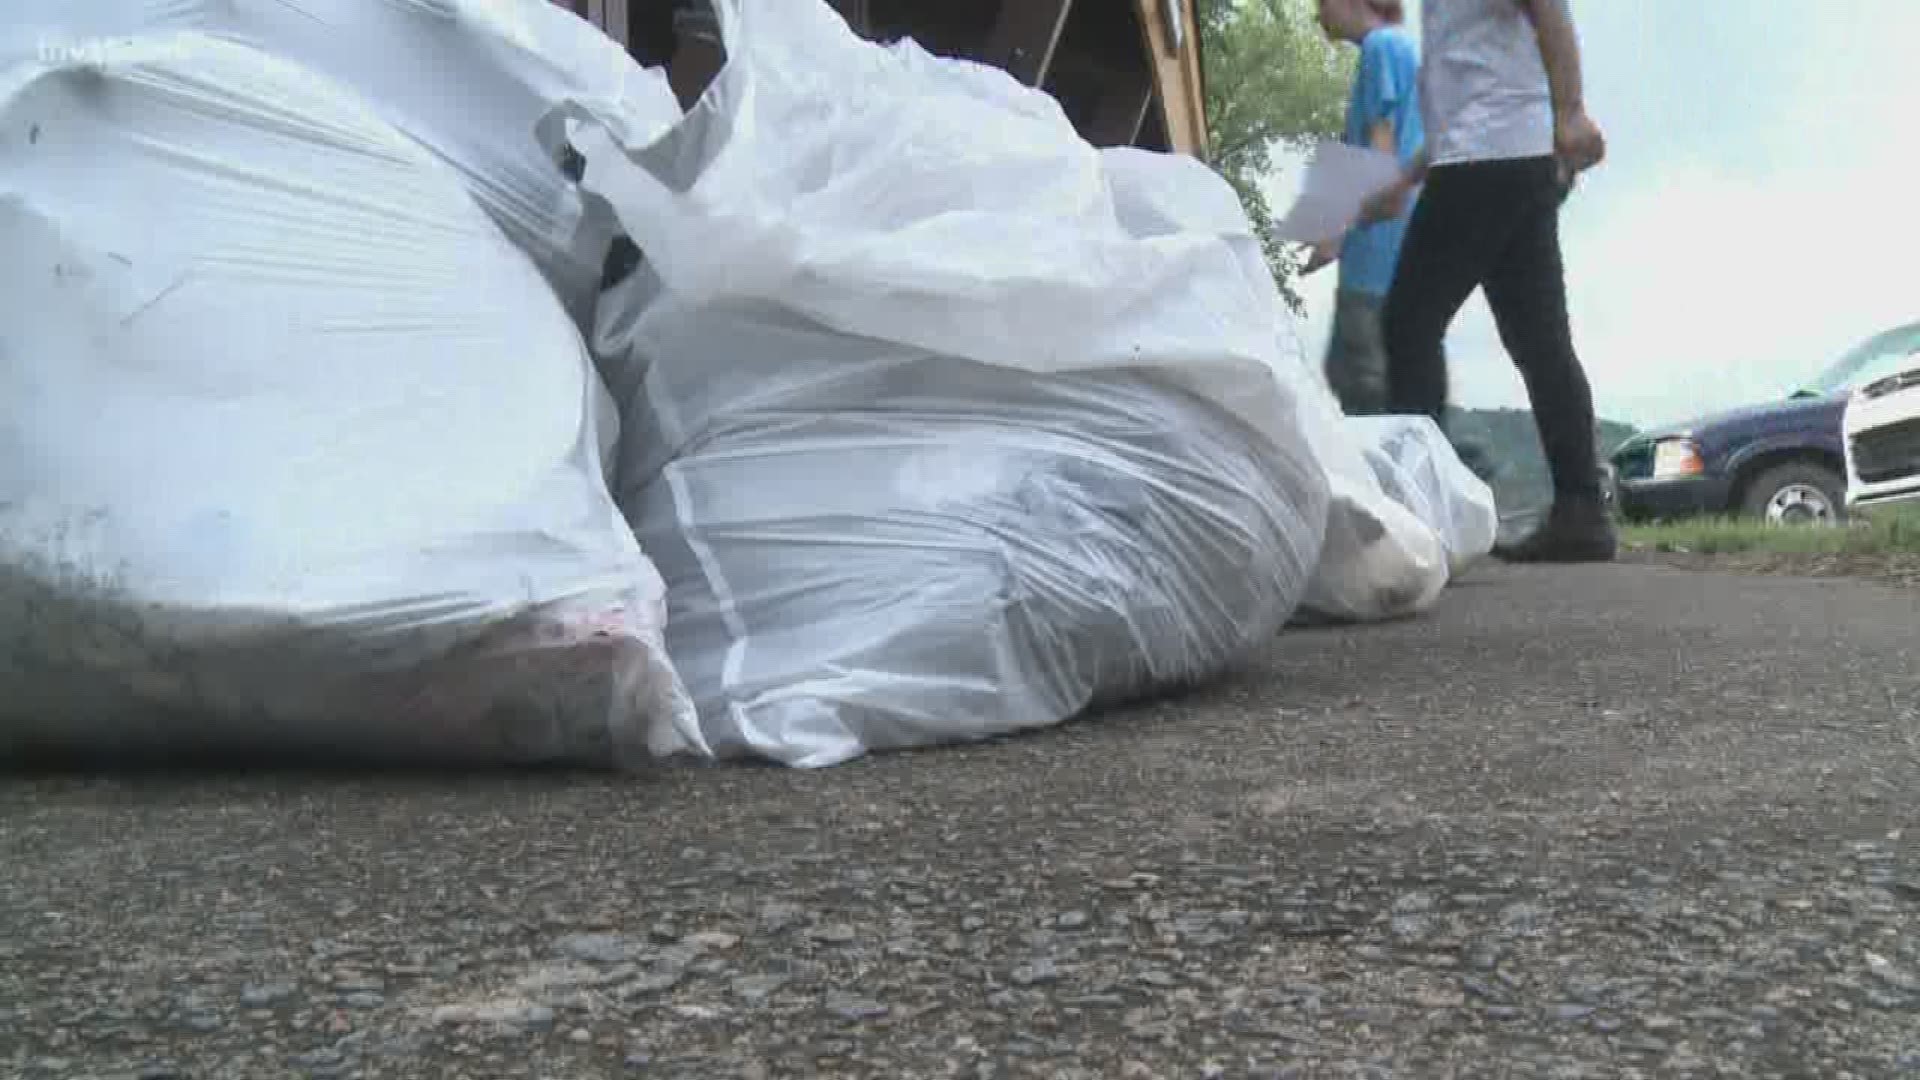 The annual "Great Arkansas cleanup" arrives at an especially important time-- after recent storms.